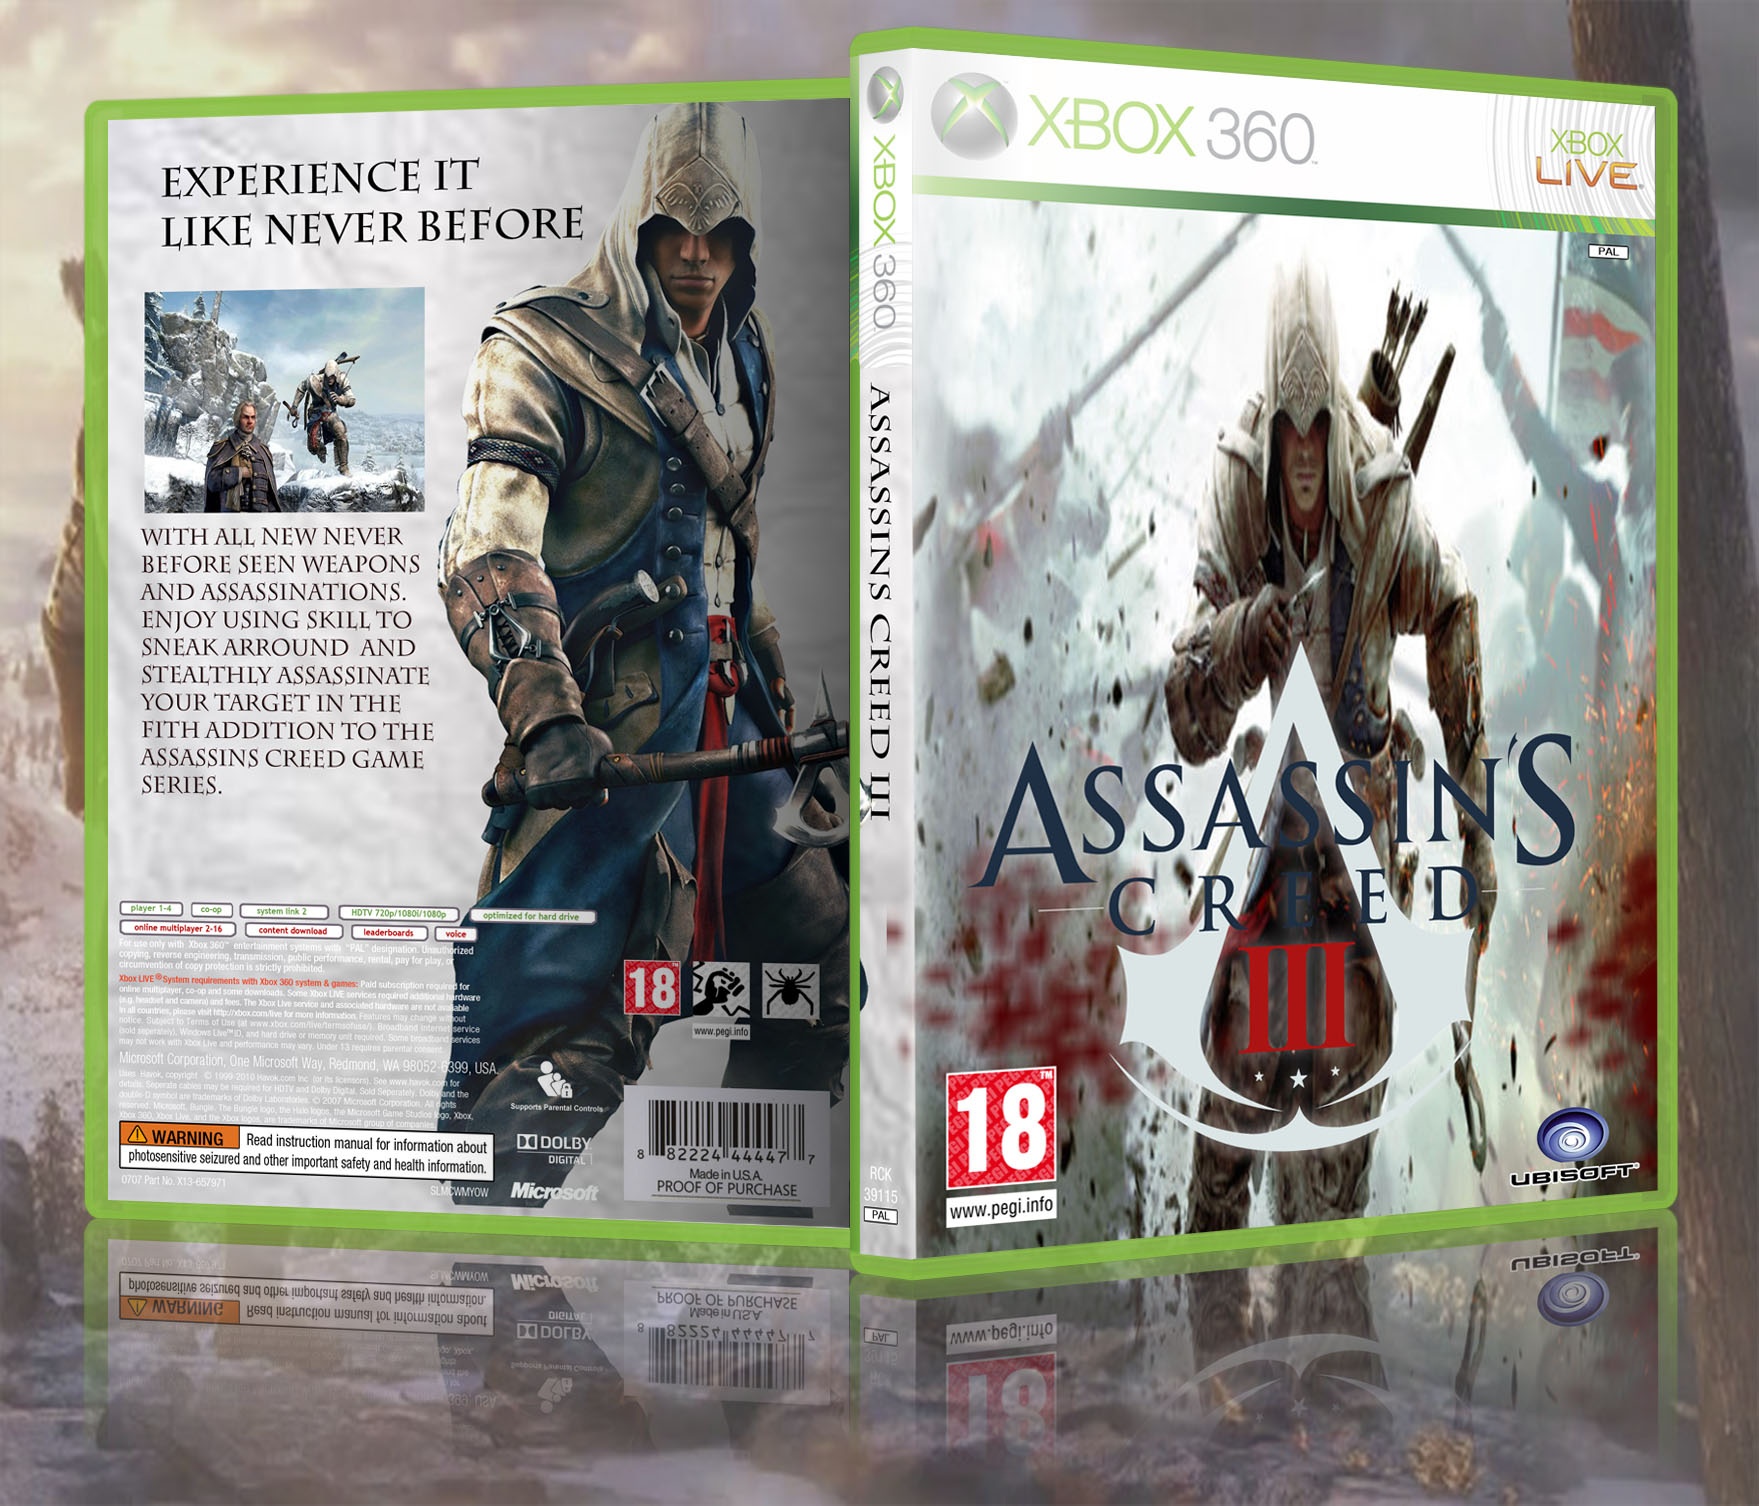 Viewing full size Assassins Creed III box cover